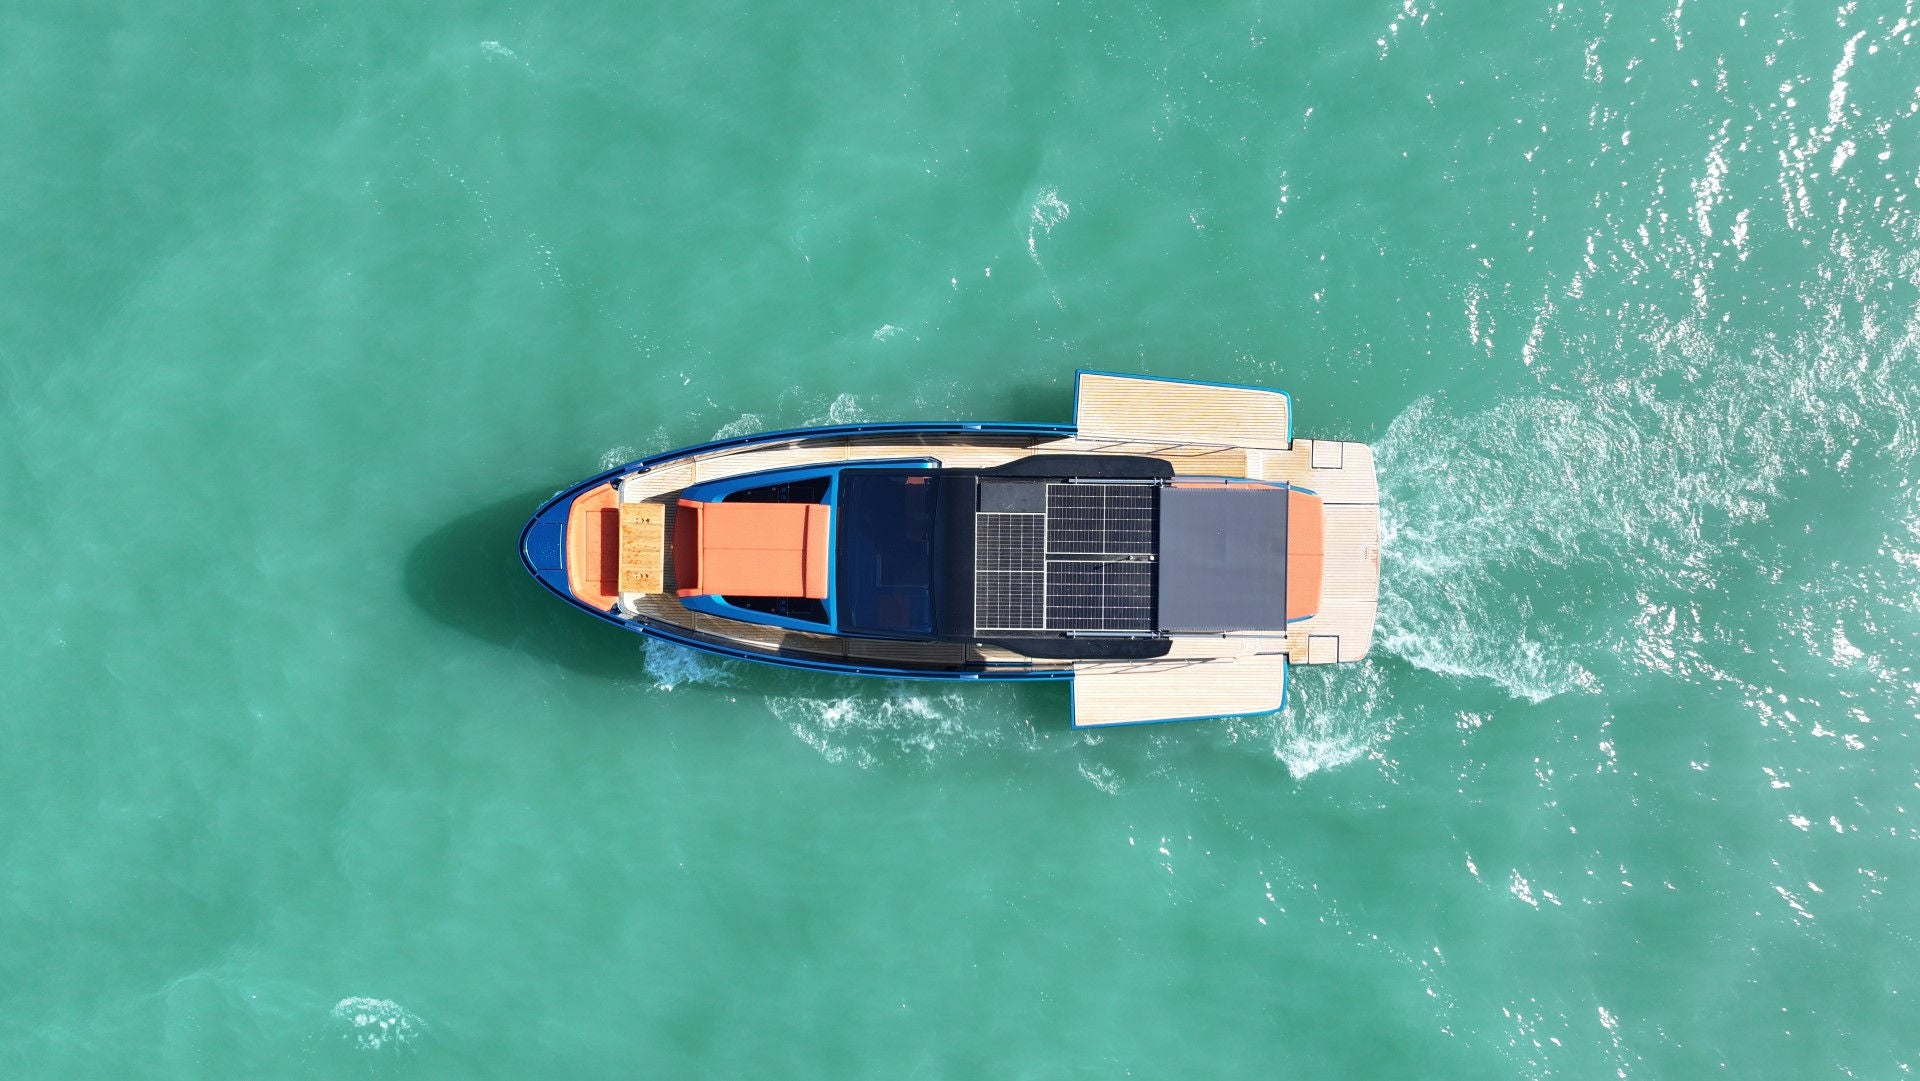 Top view of a boat with Telescopic Shade marine roof